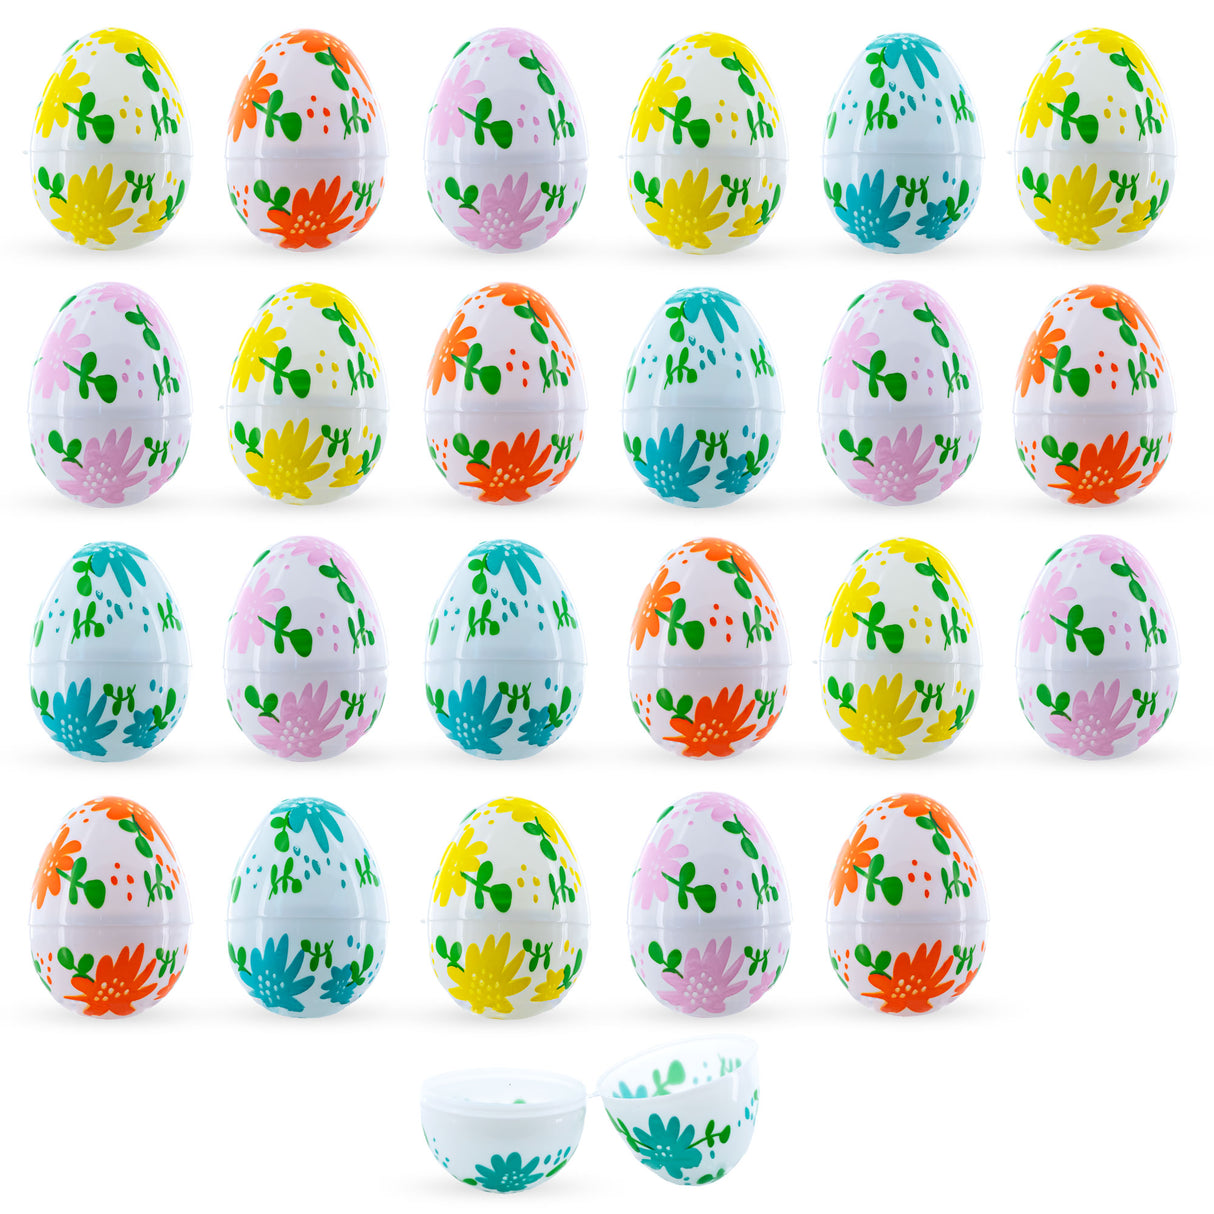 Plastic Whimsical Blooms: Set of 24 Flowers on White Plastic Easter Eggs, 2.25 Inches Each in Multi color Oval